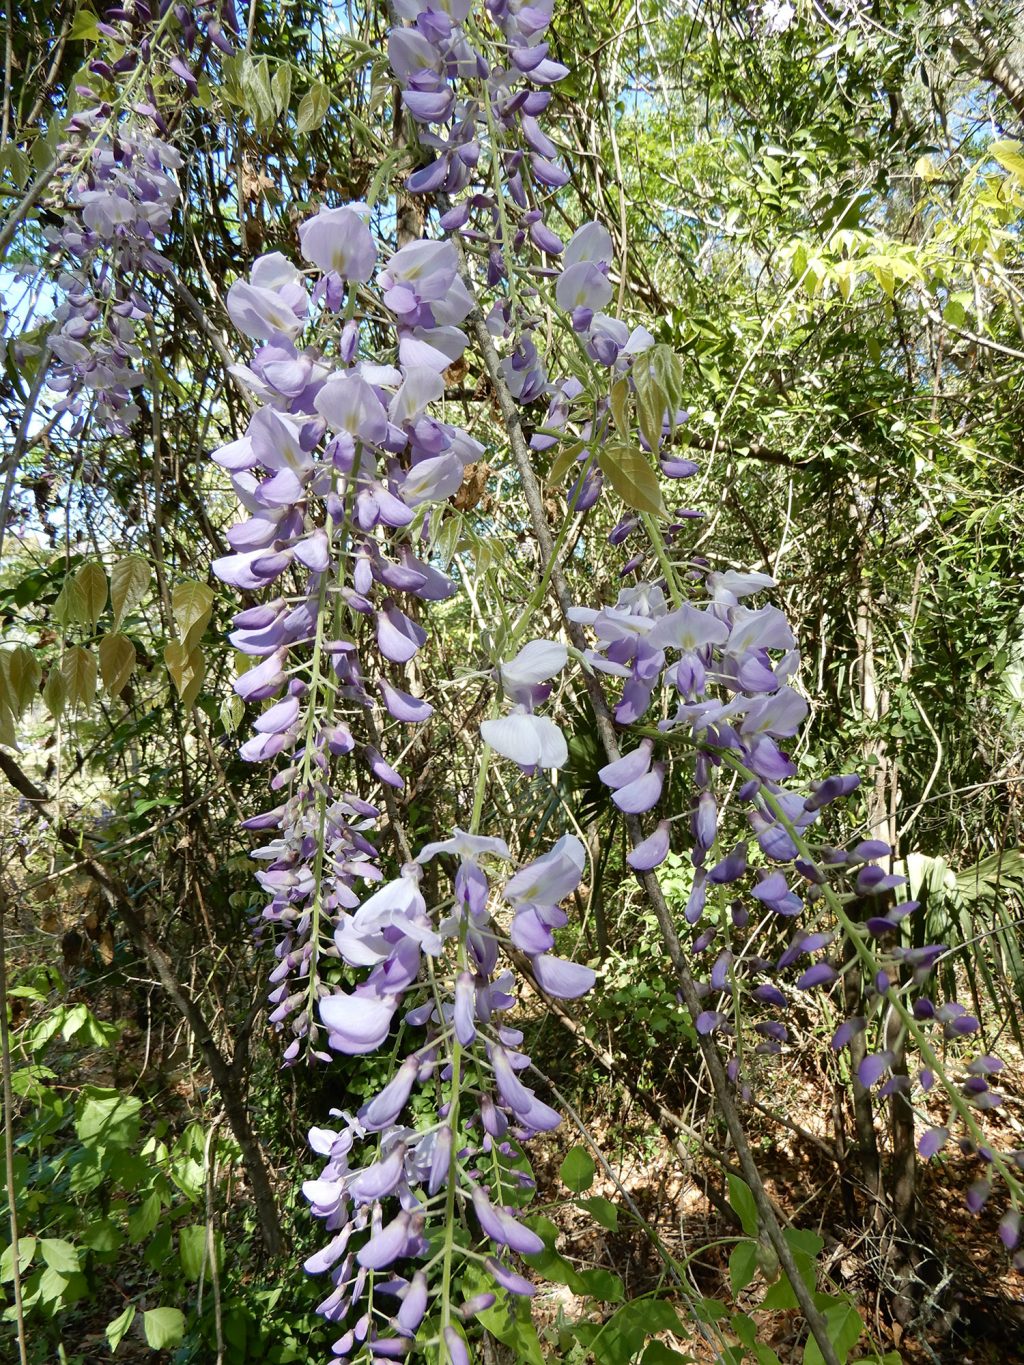 Chinese wisteria flower clusters